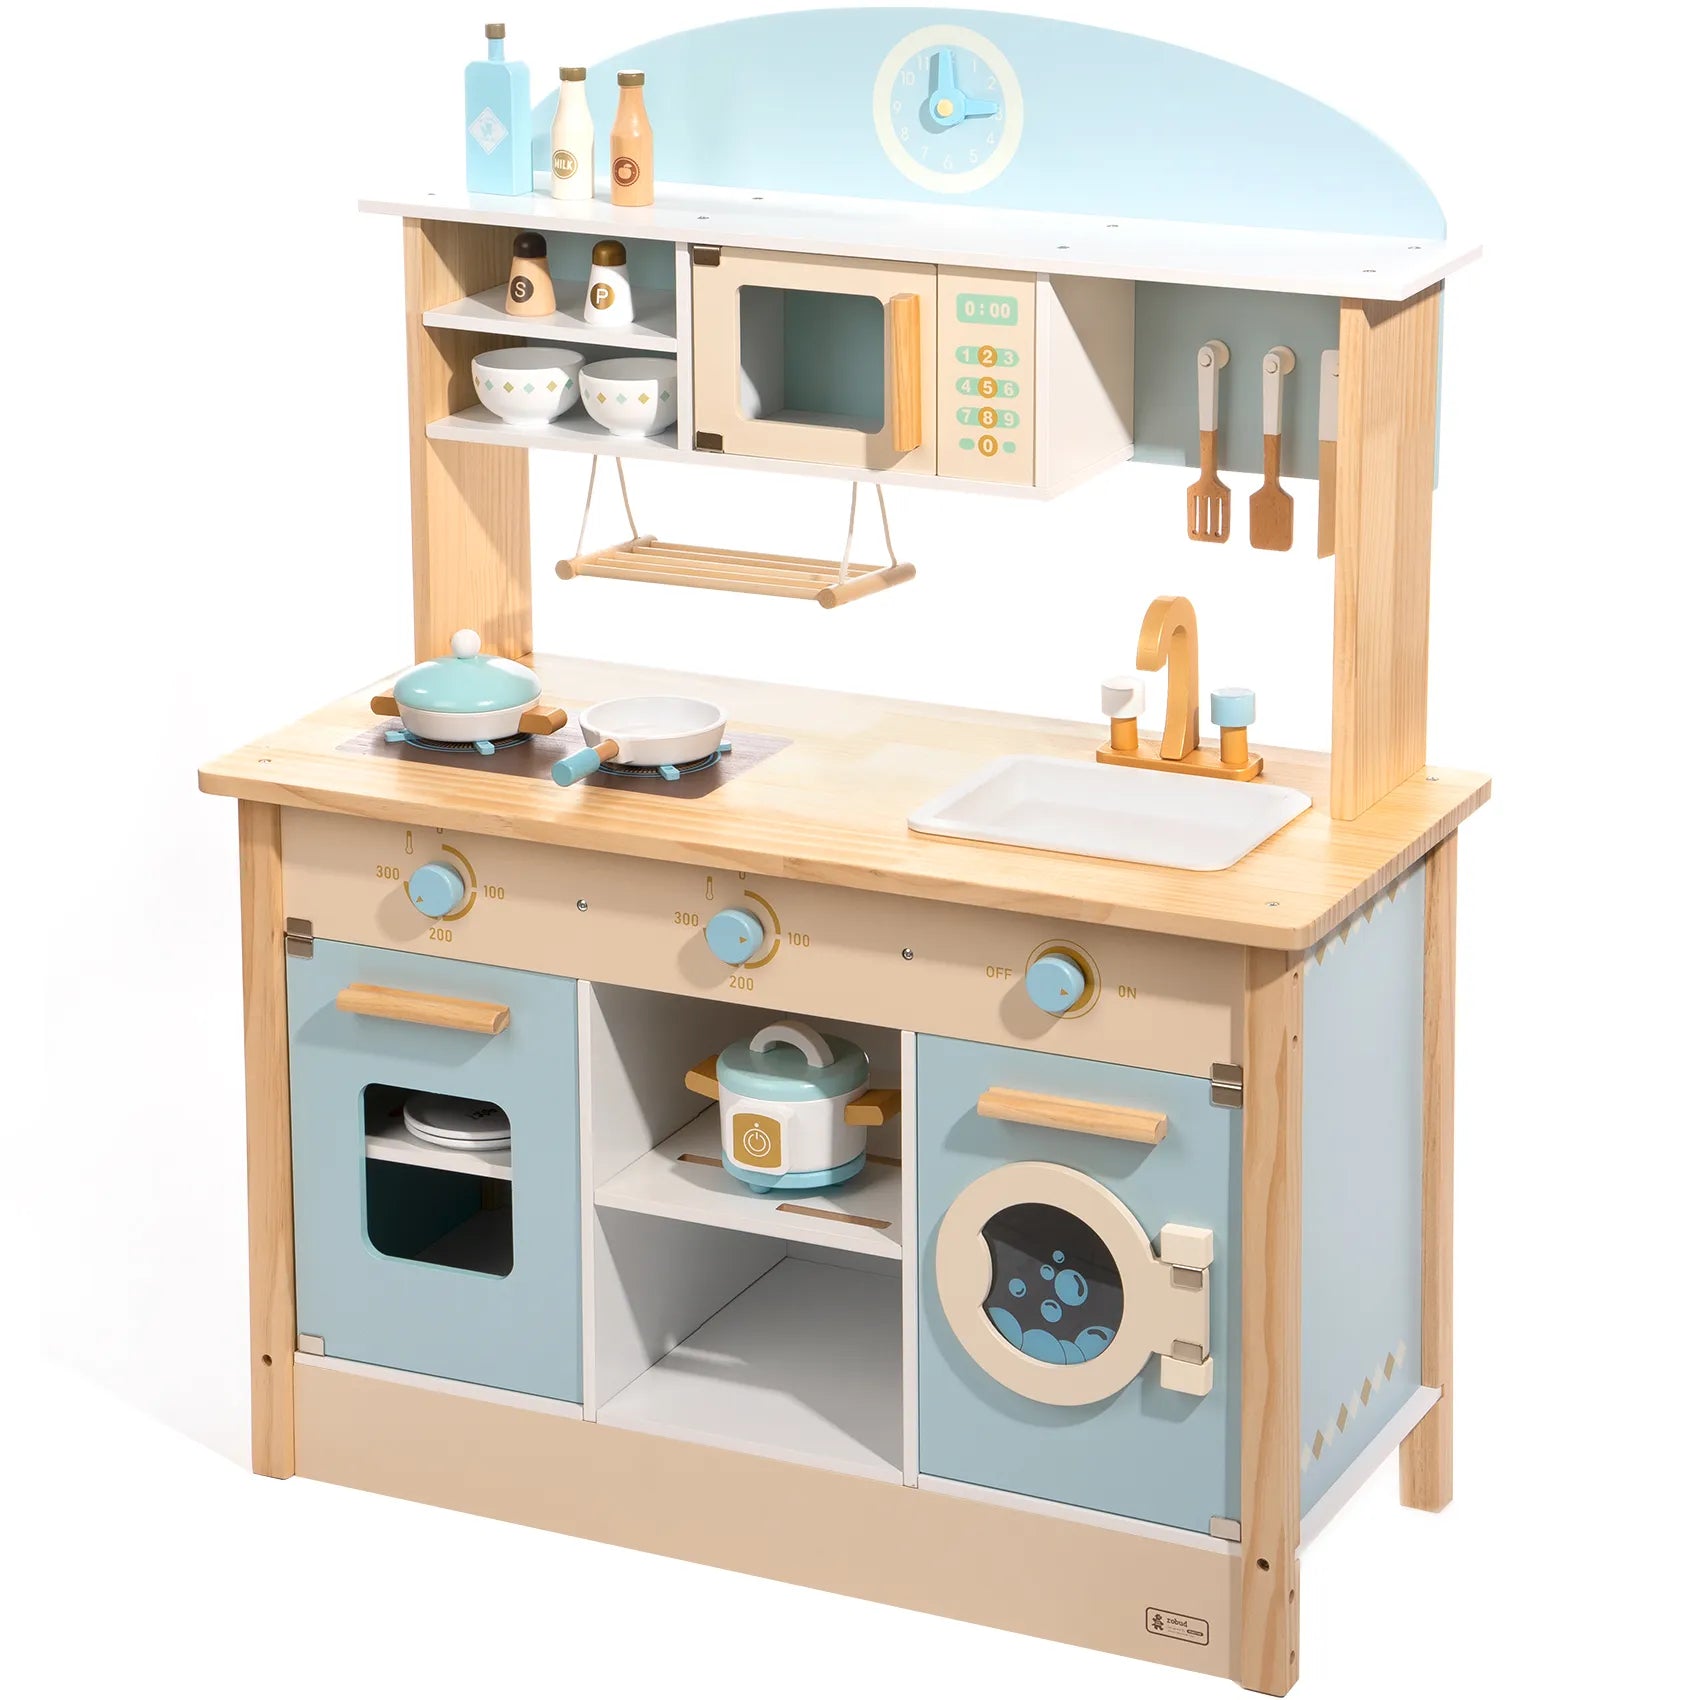 Wooden Play Kitchen Set For Kids